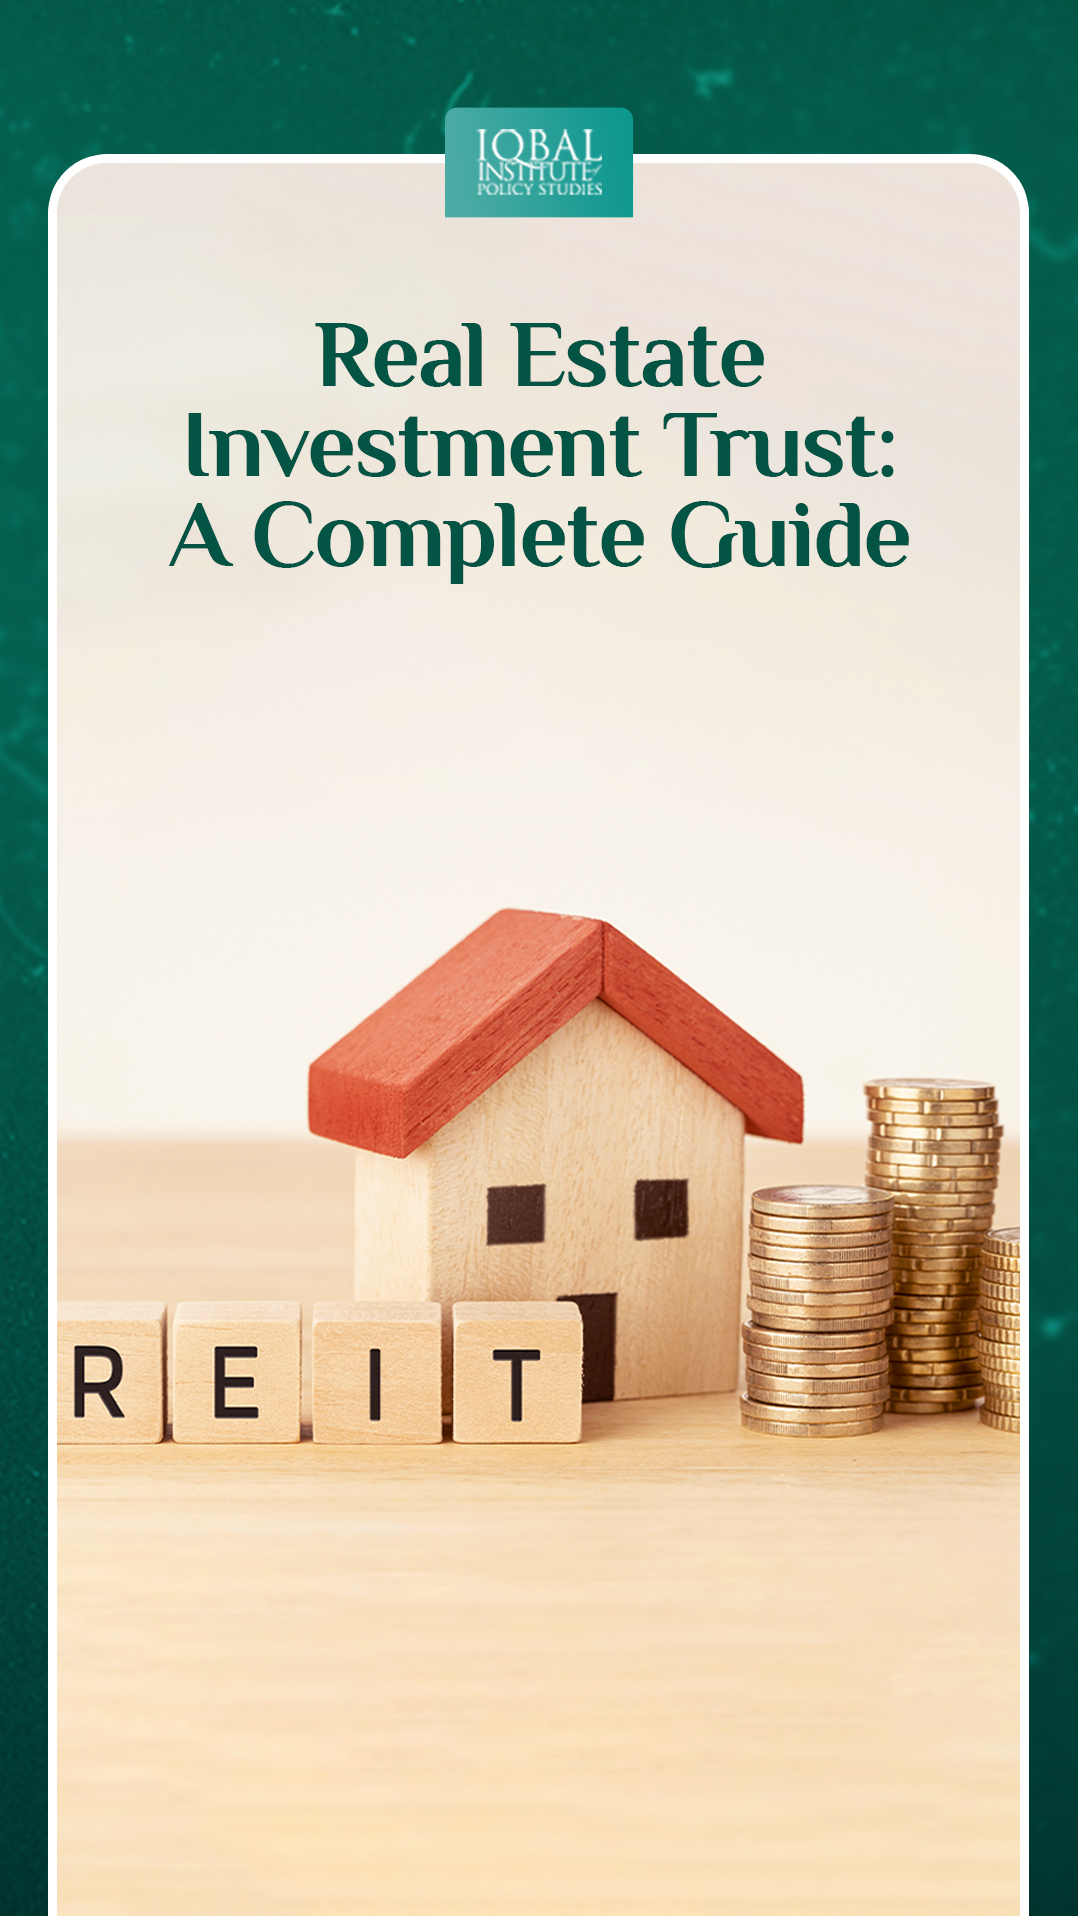 Real Estate Investment Trust: A Complete Guide